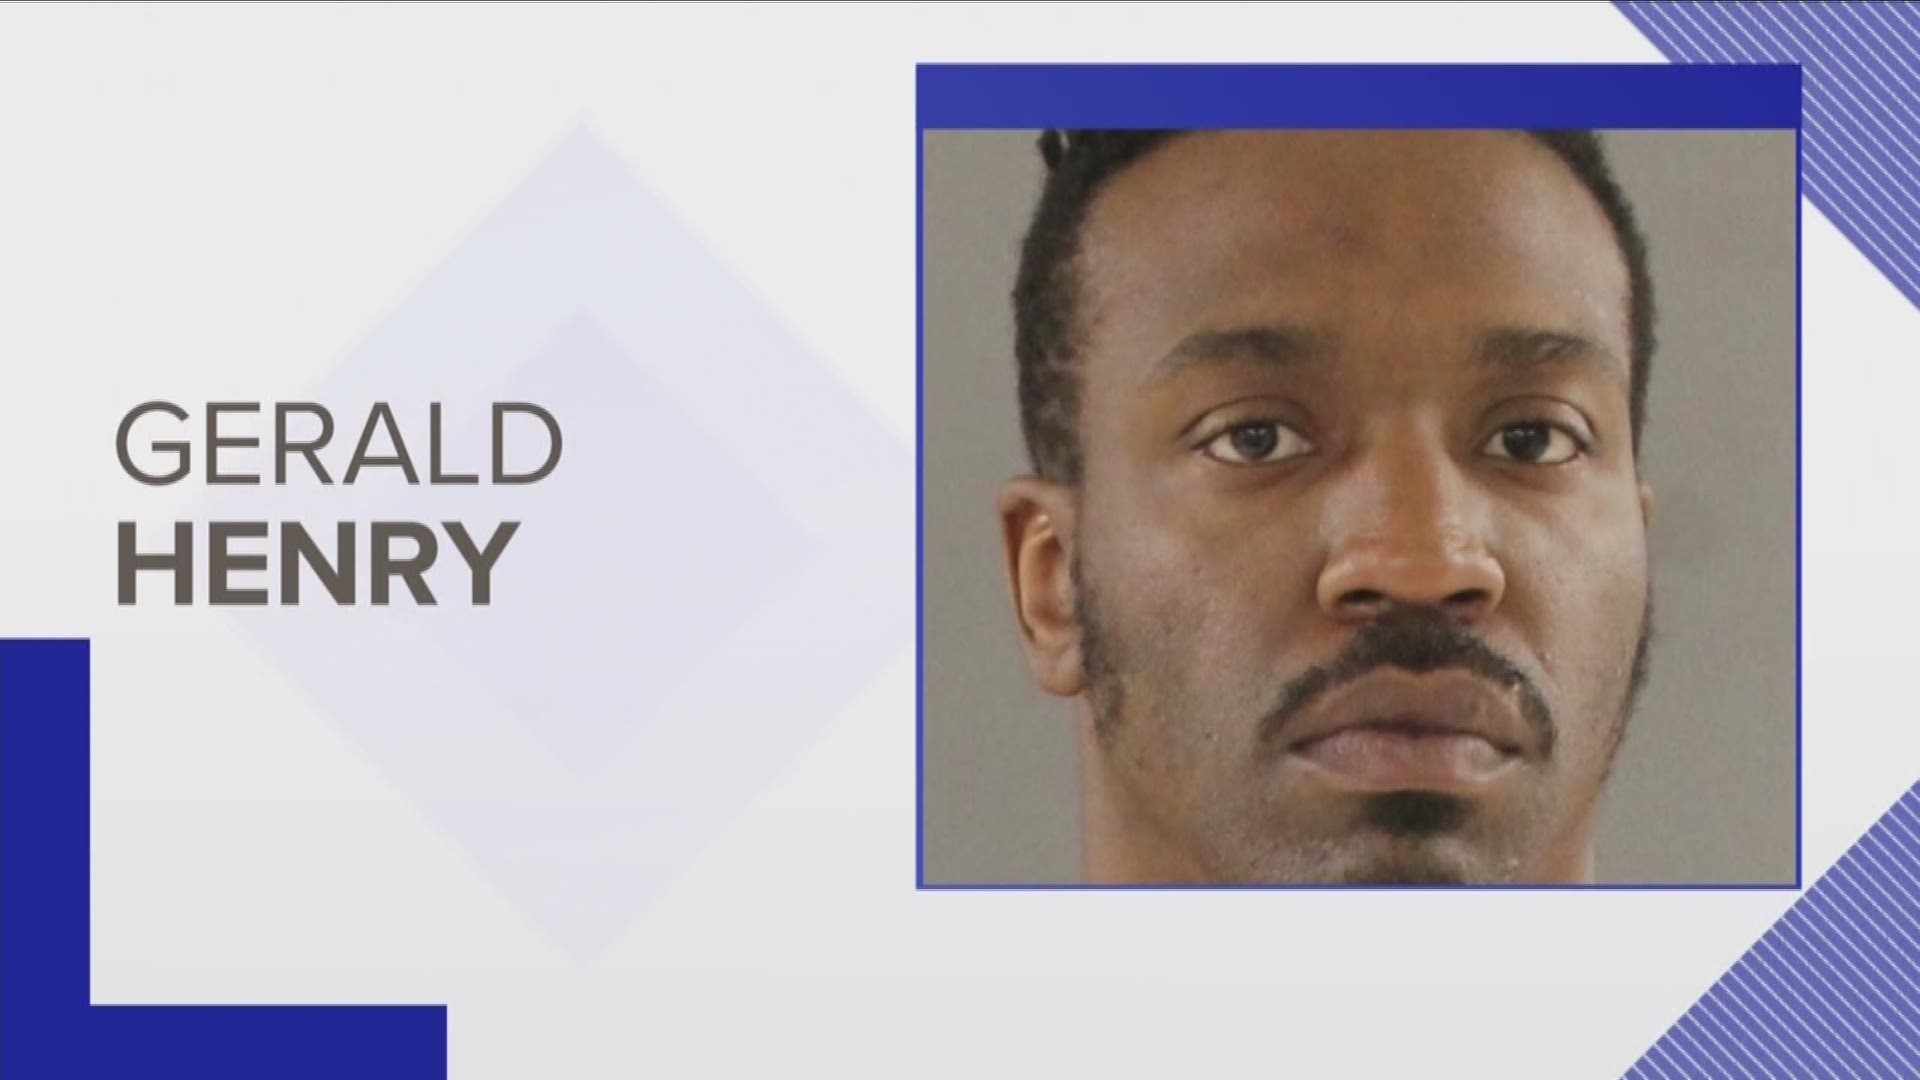 A man accused of shooting and killing another man on North Broadway is in police custody tonight. Gerald Henry was wanted for second-degree murder.